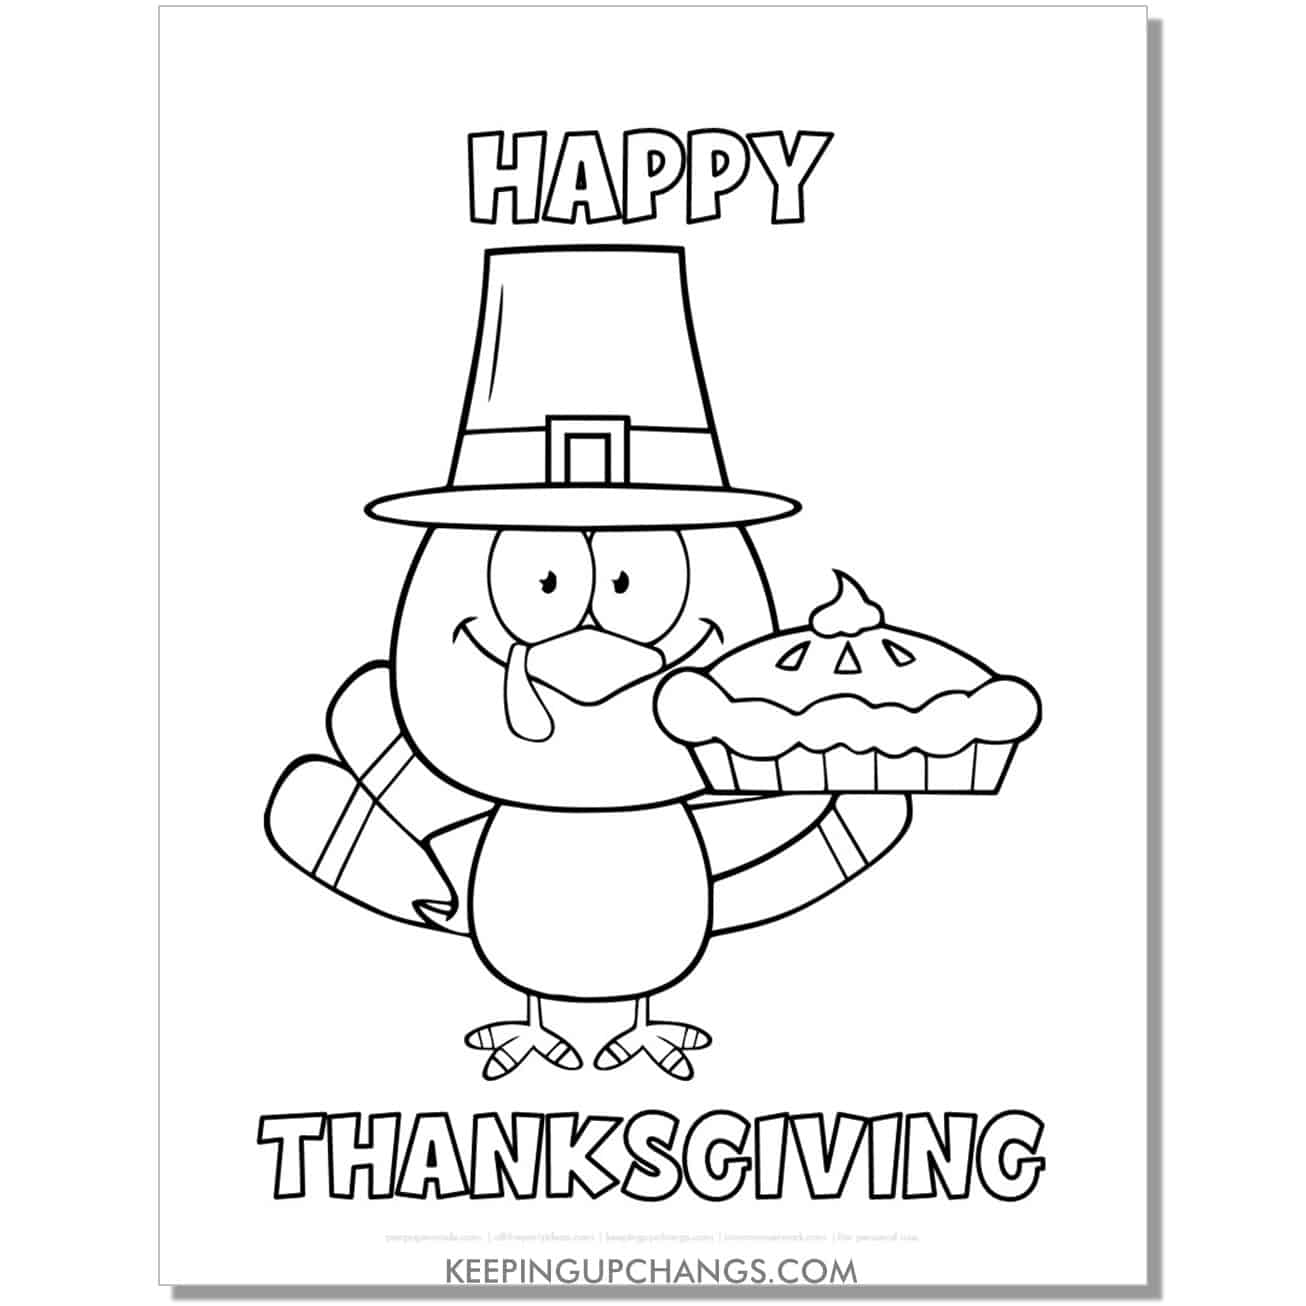 free happy thanksgiving cartoon turkey coloring page for fall, thanksgiving.